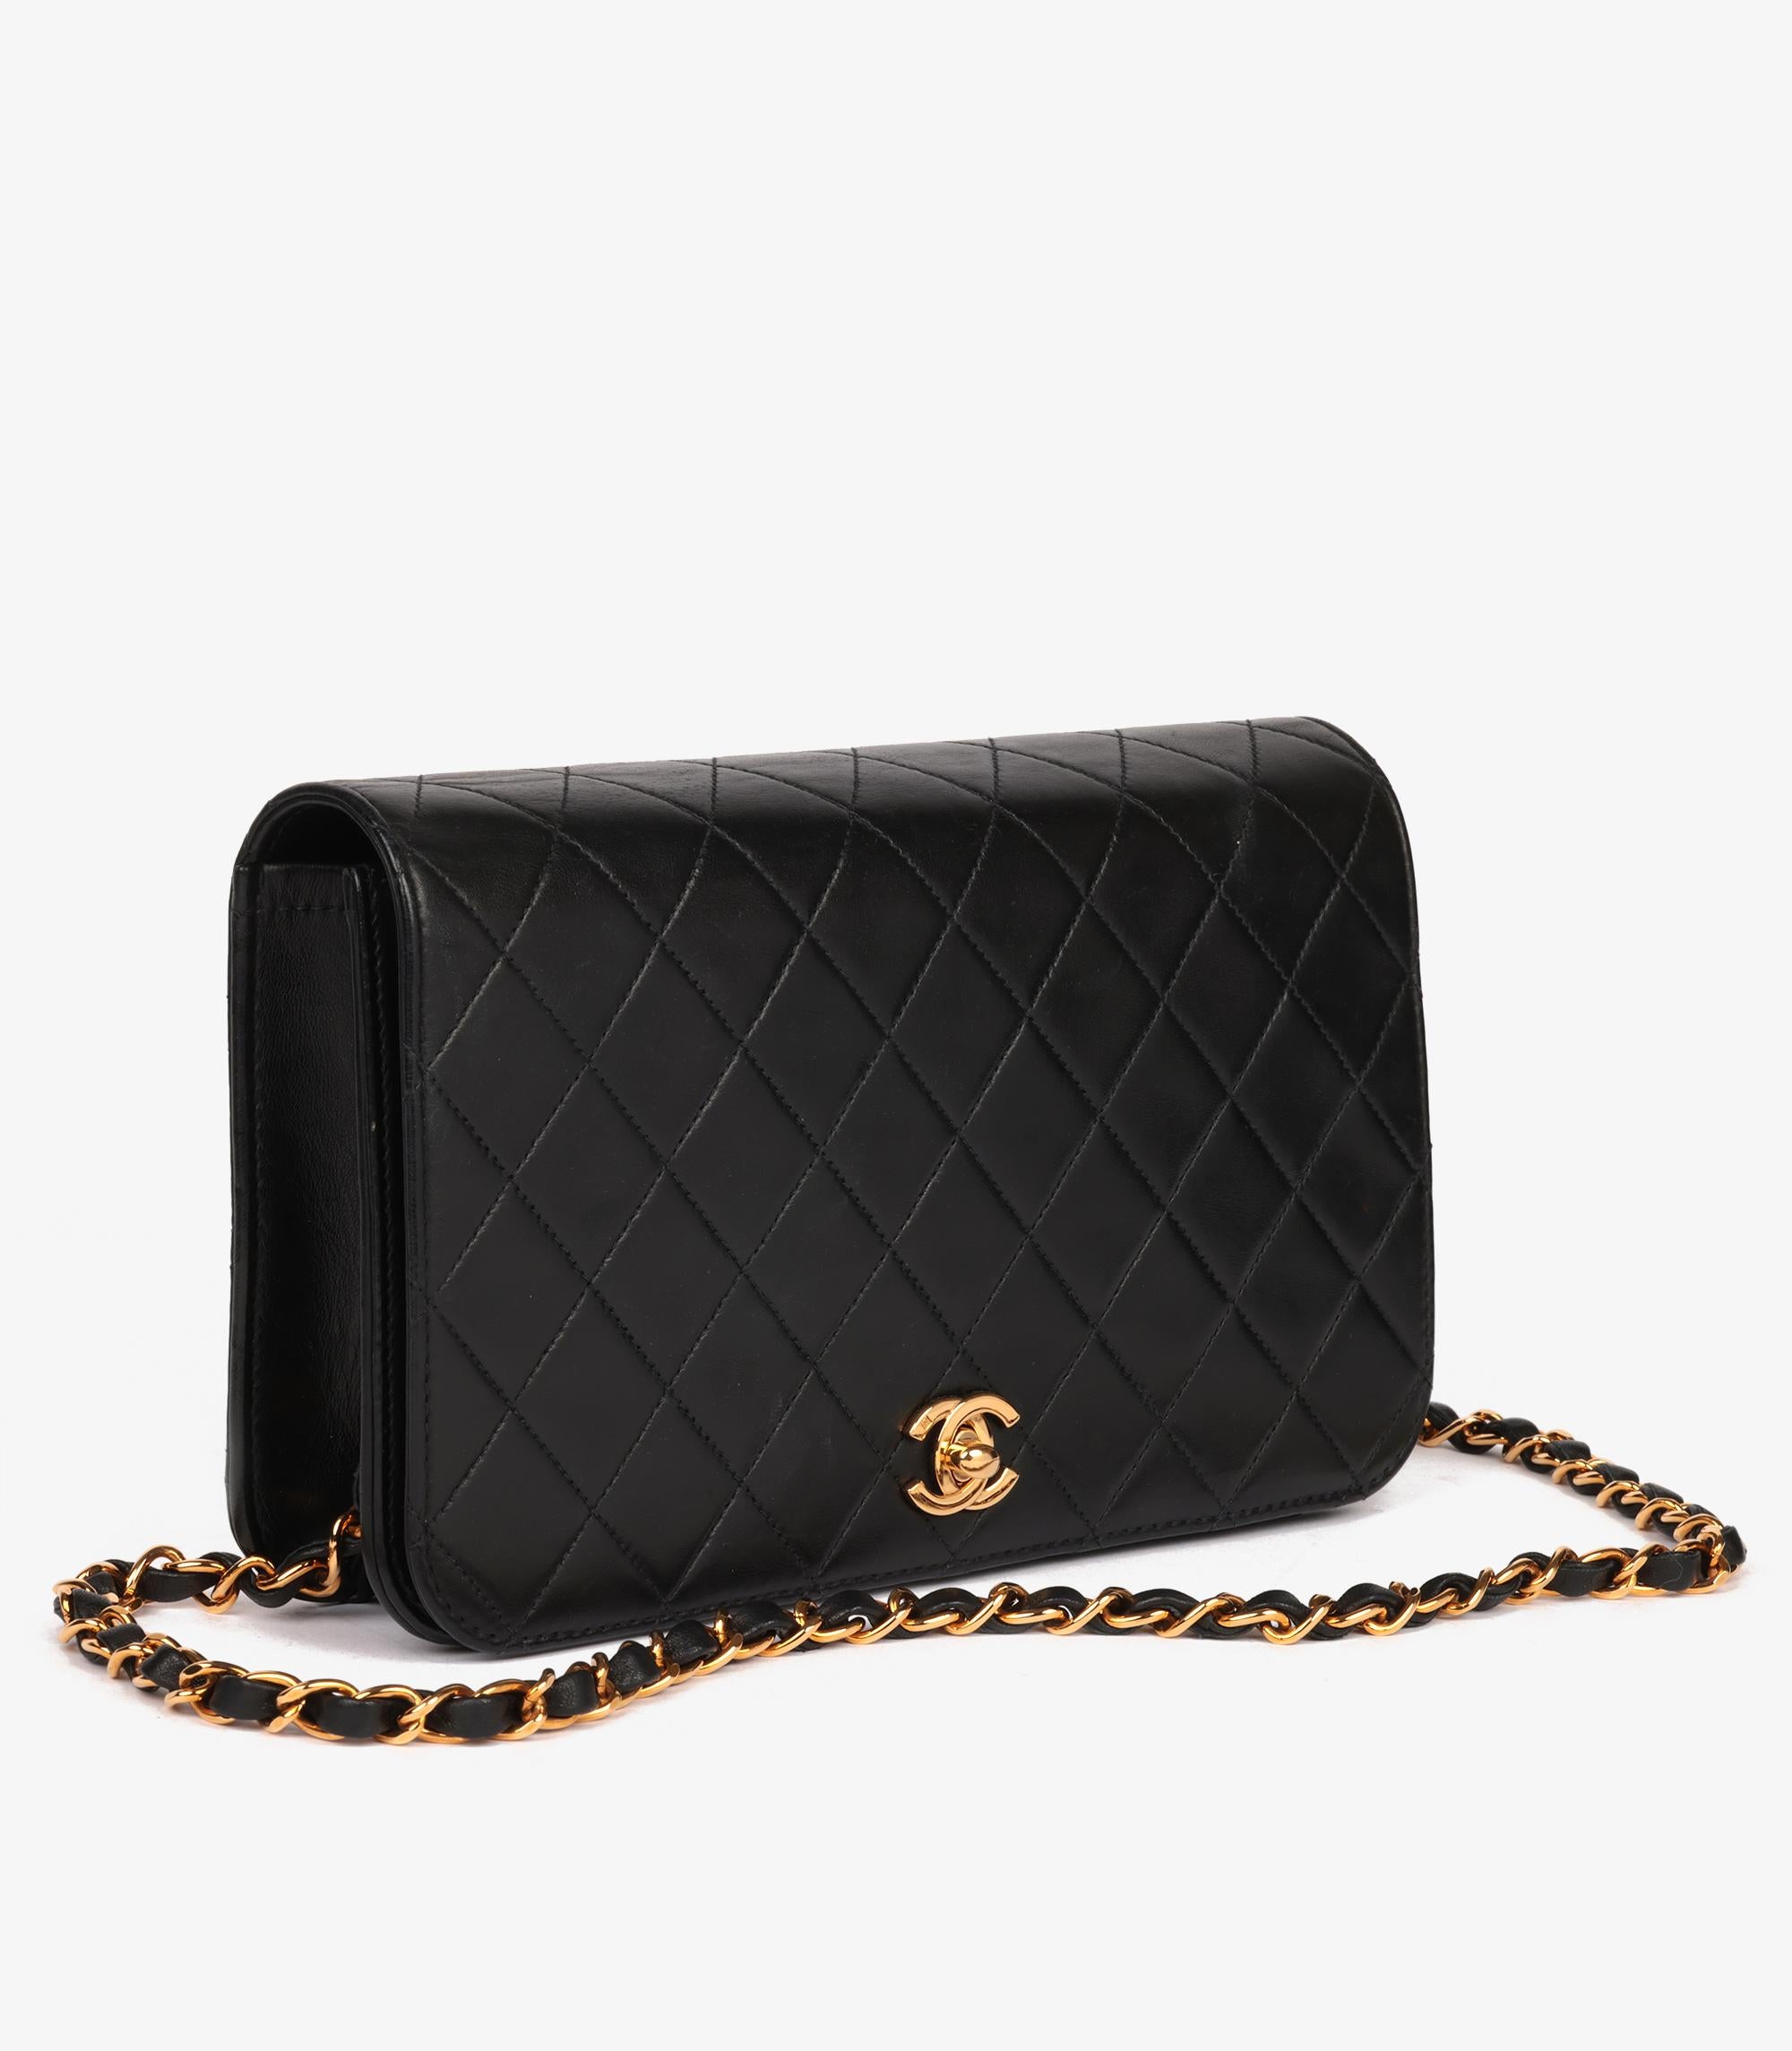 Chanel Black Quilted Lambskin Vintage Small Classic Single Full Flap Bag

Brand- Chanel
Model- Small Classic Single Full Flap Bag
Product Type- Shoulder
Serial Number- 8854371
Age- Circa 2003
Accompanied By- Chanel Dust Bag, Authenticity